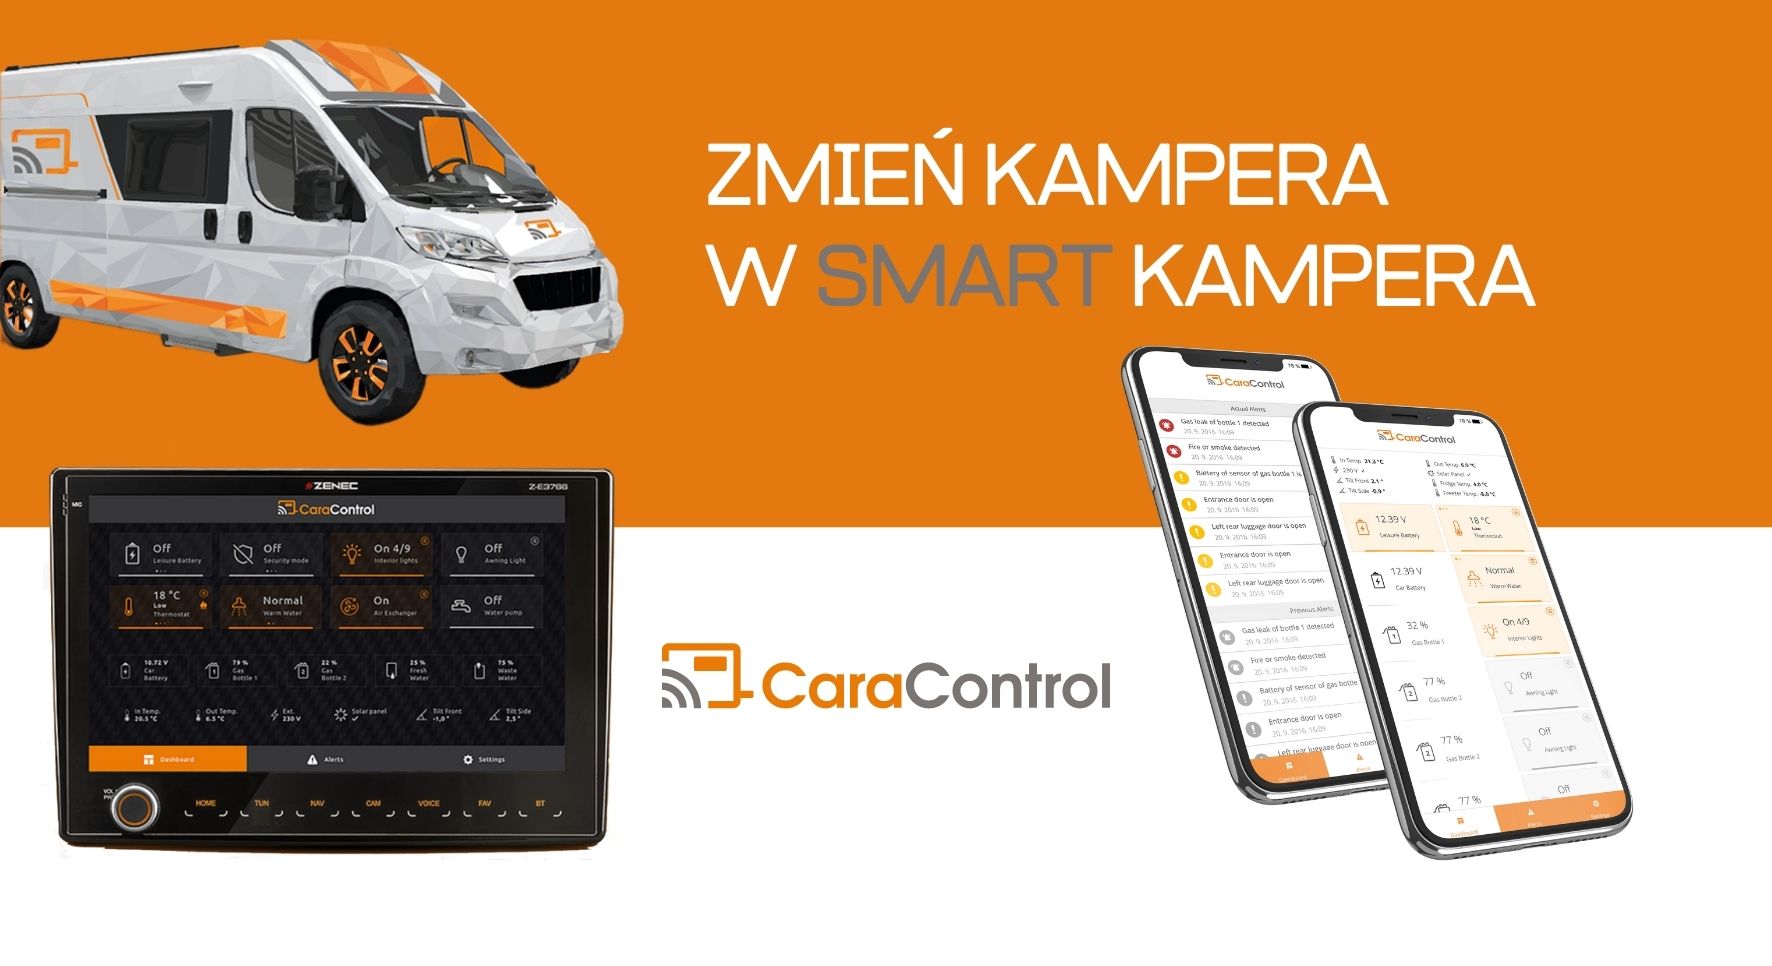 Smartphone controlled camper thanks to CaraControl – main image